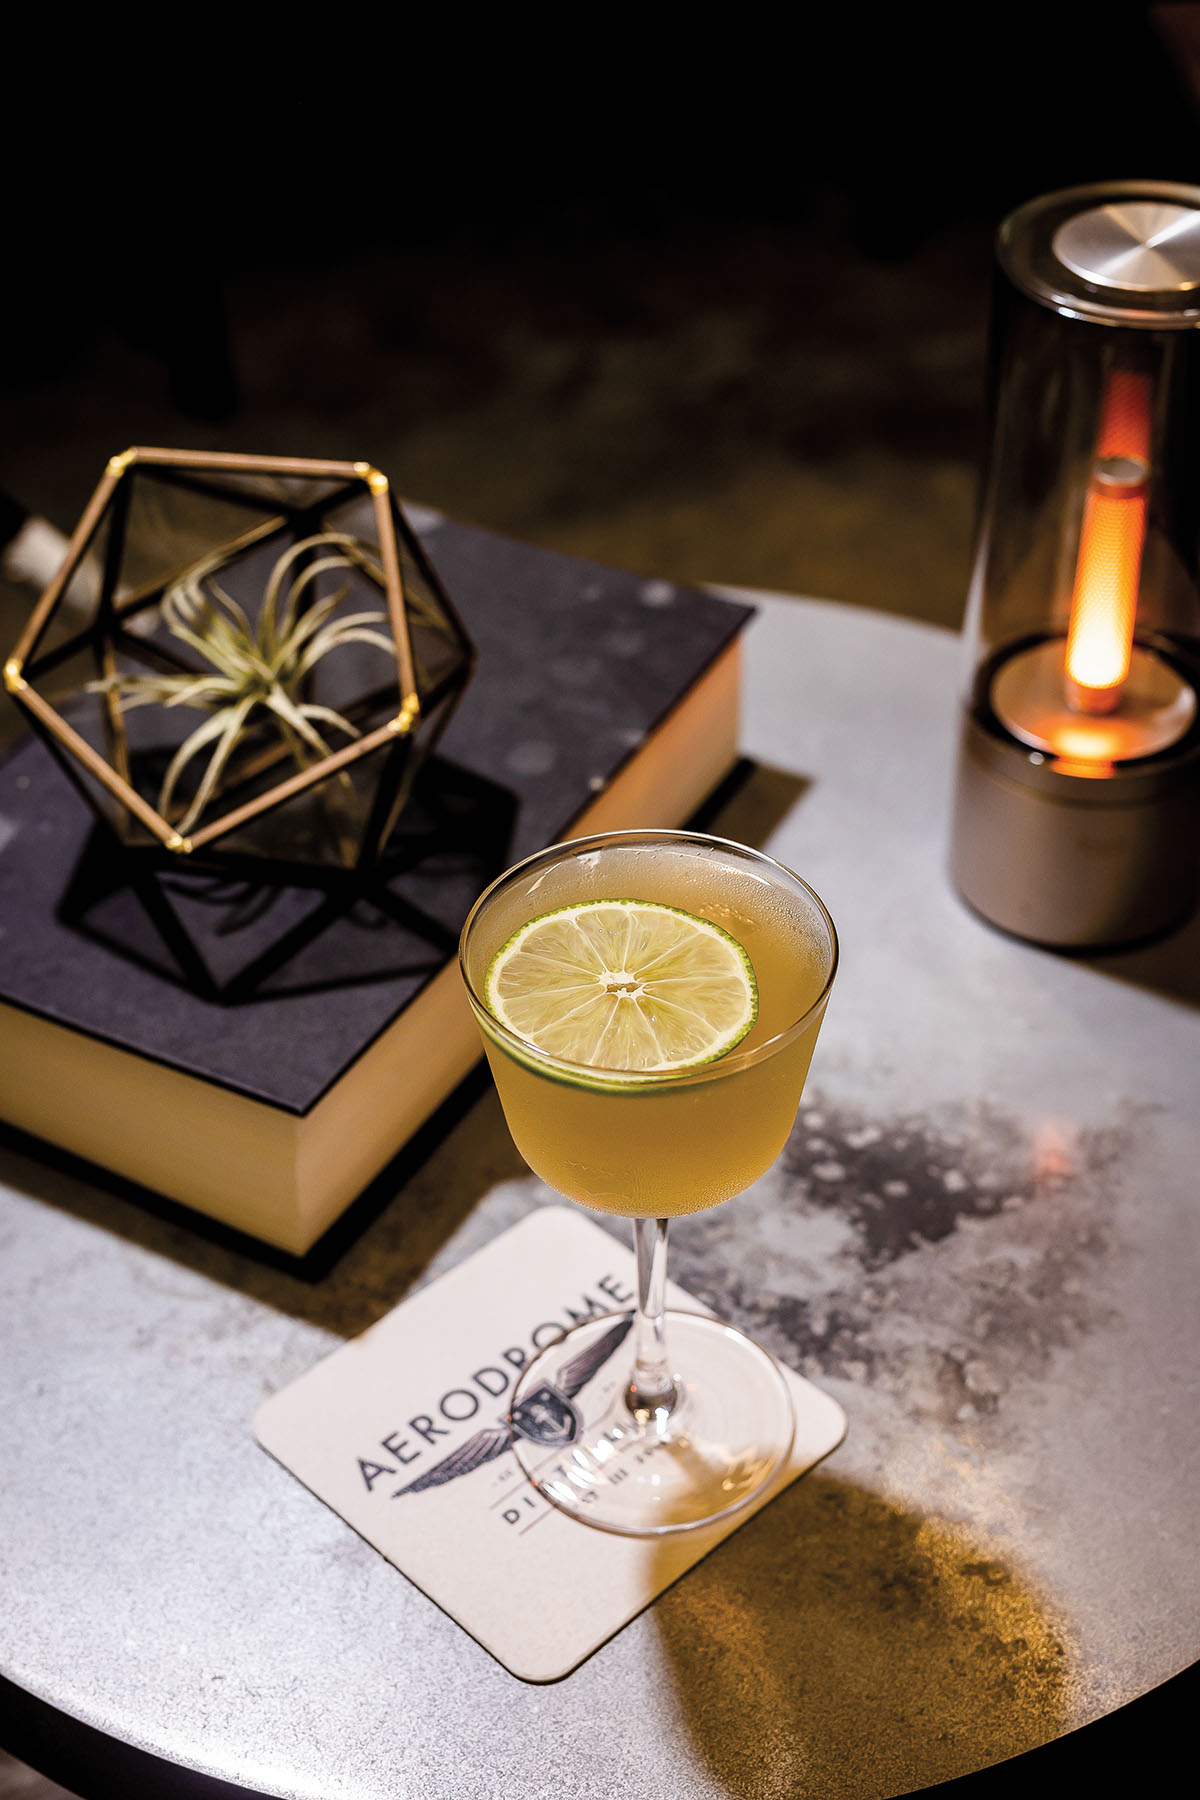 An elegantly-presented cocktail in a tall glass with a slice of lime on a coaster reading "Aerodrome"